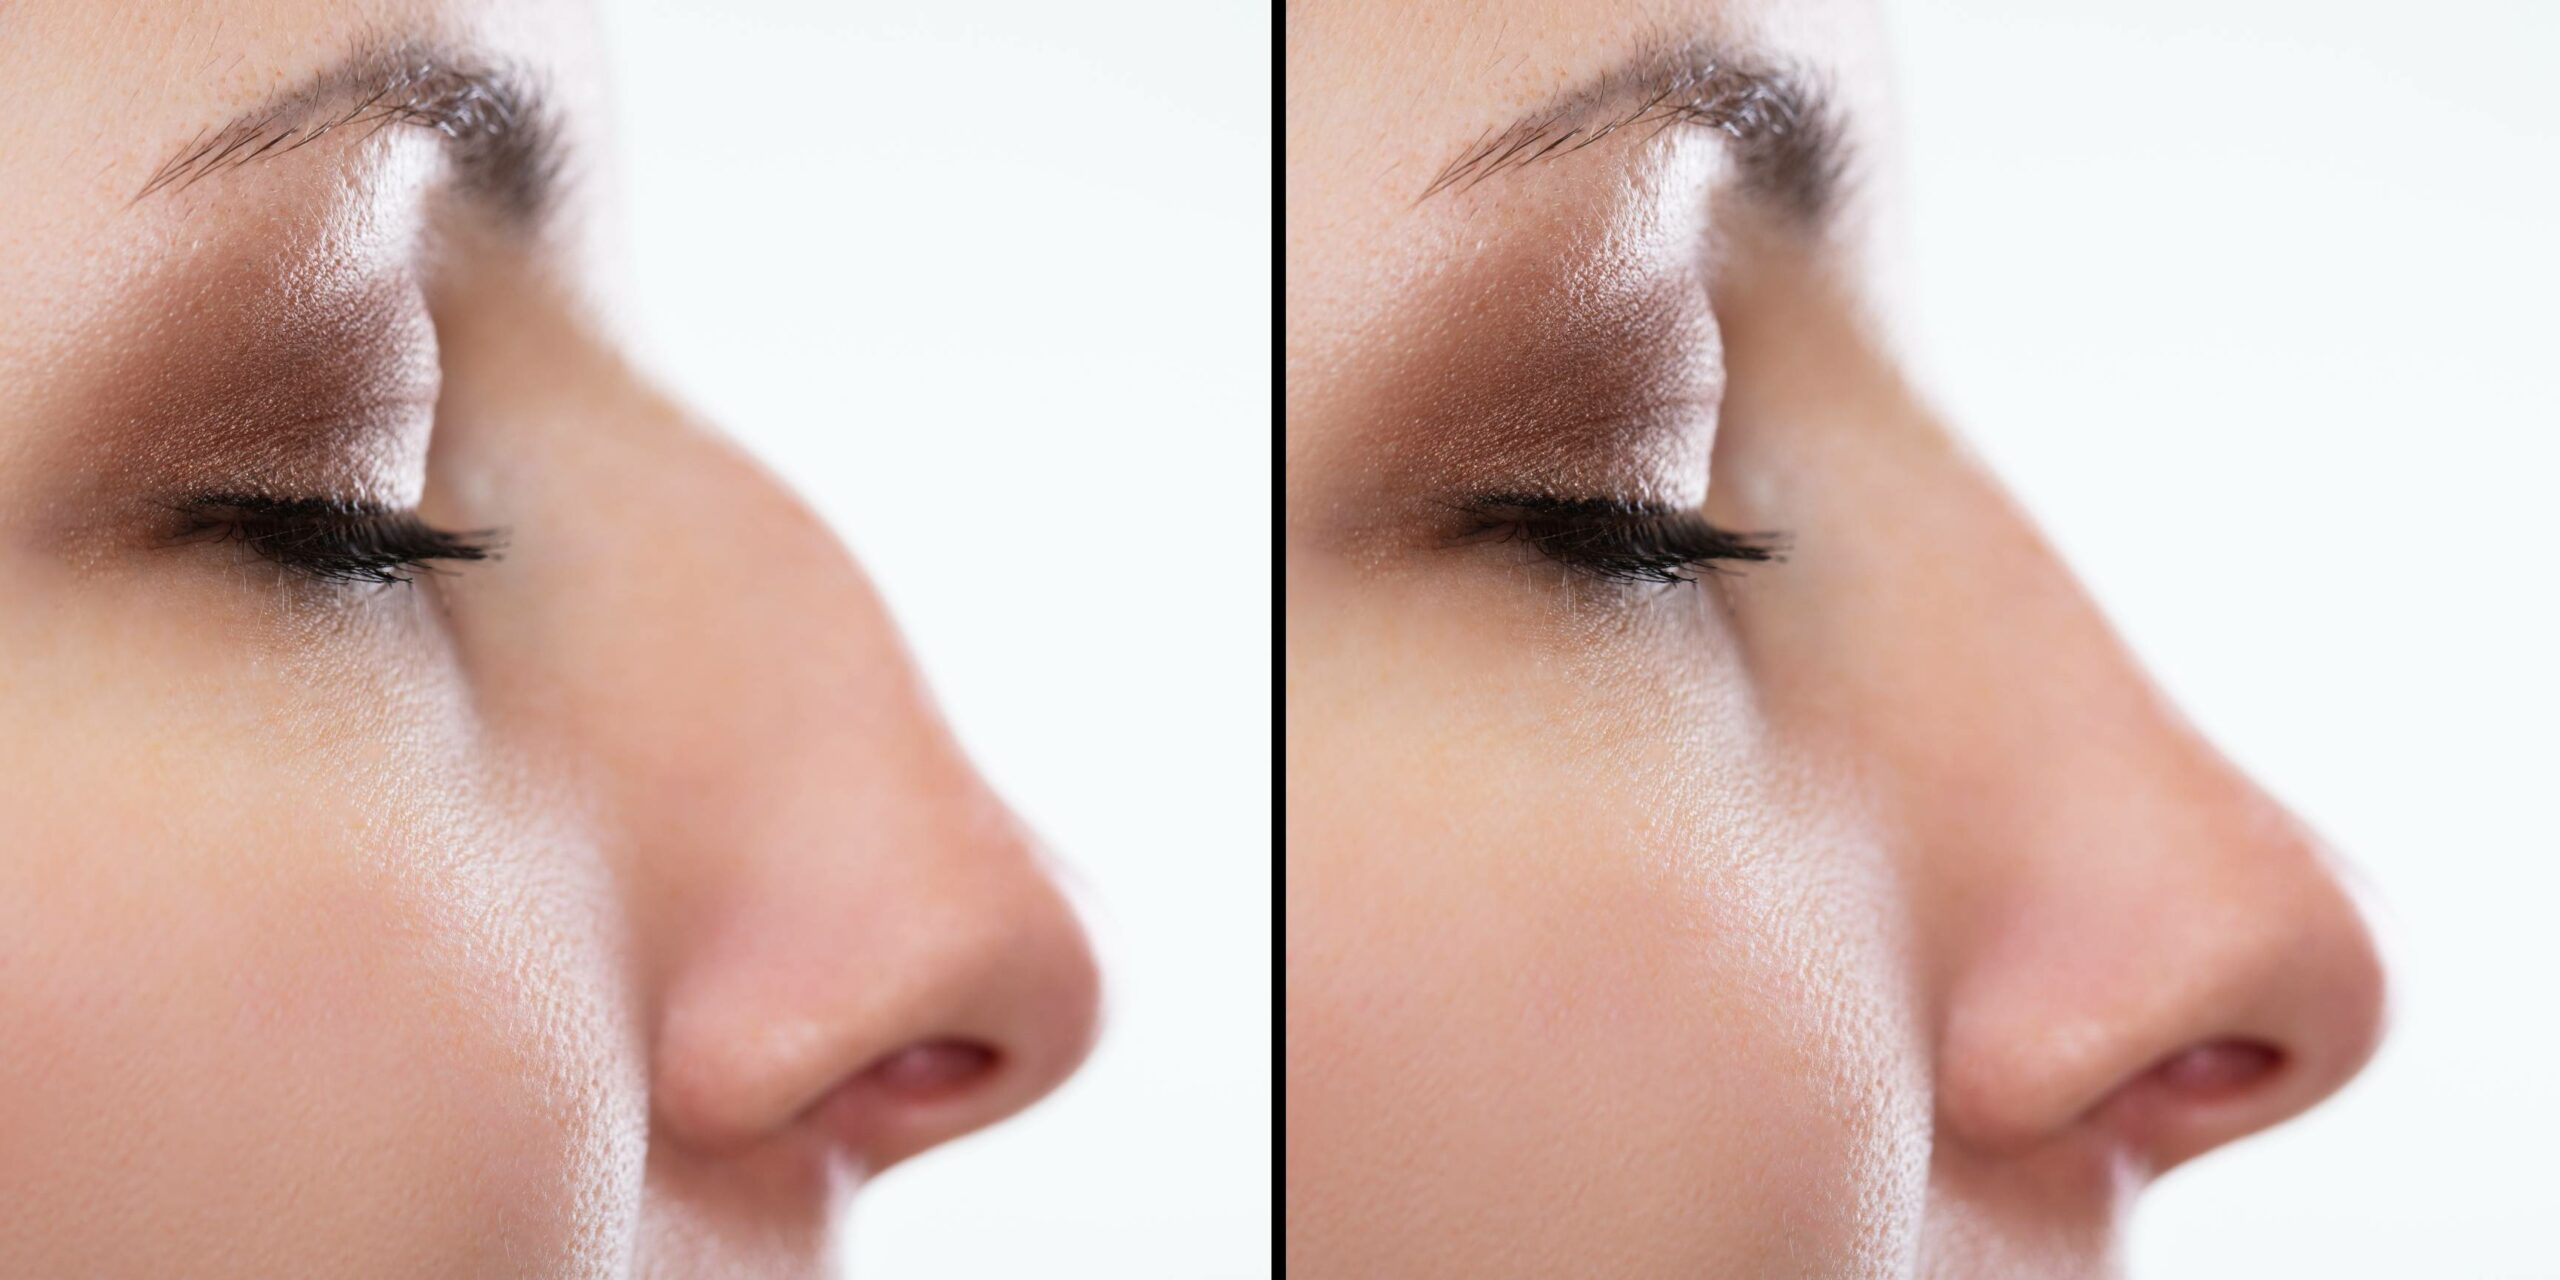 Reshape your chin or nose